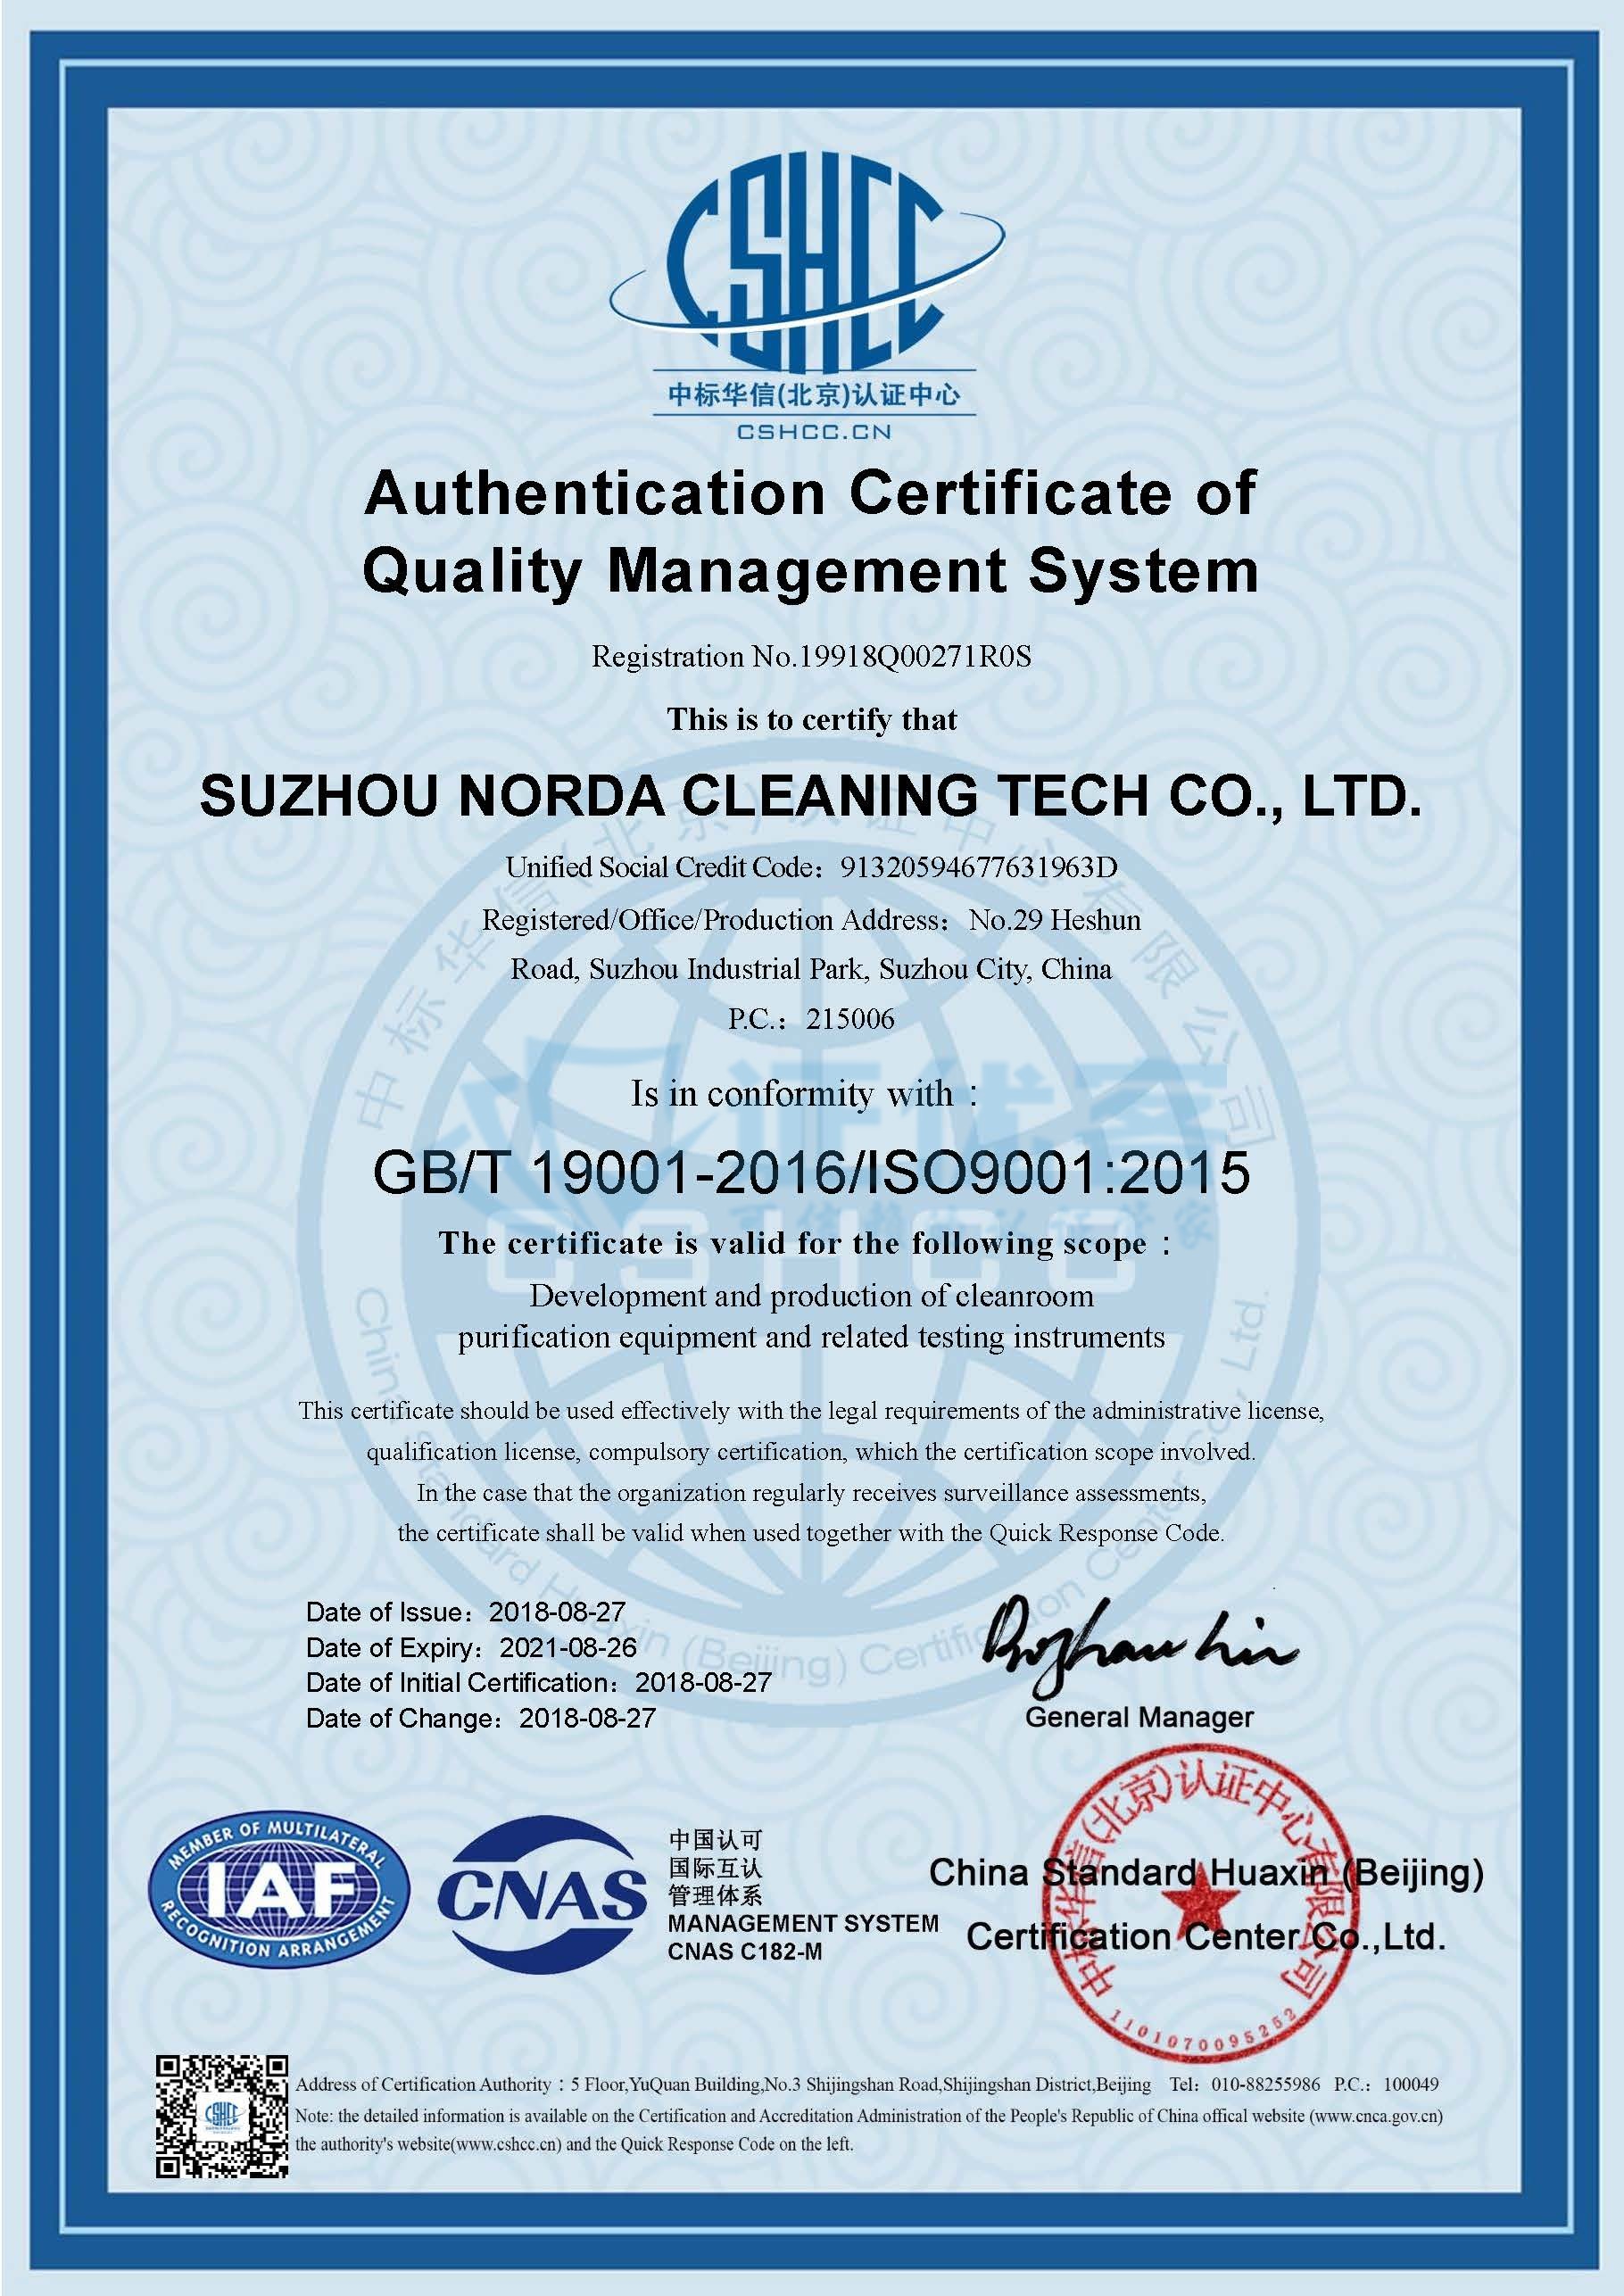 <b>The ISO9001:2015 Certificate</b>